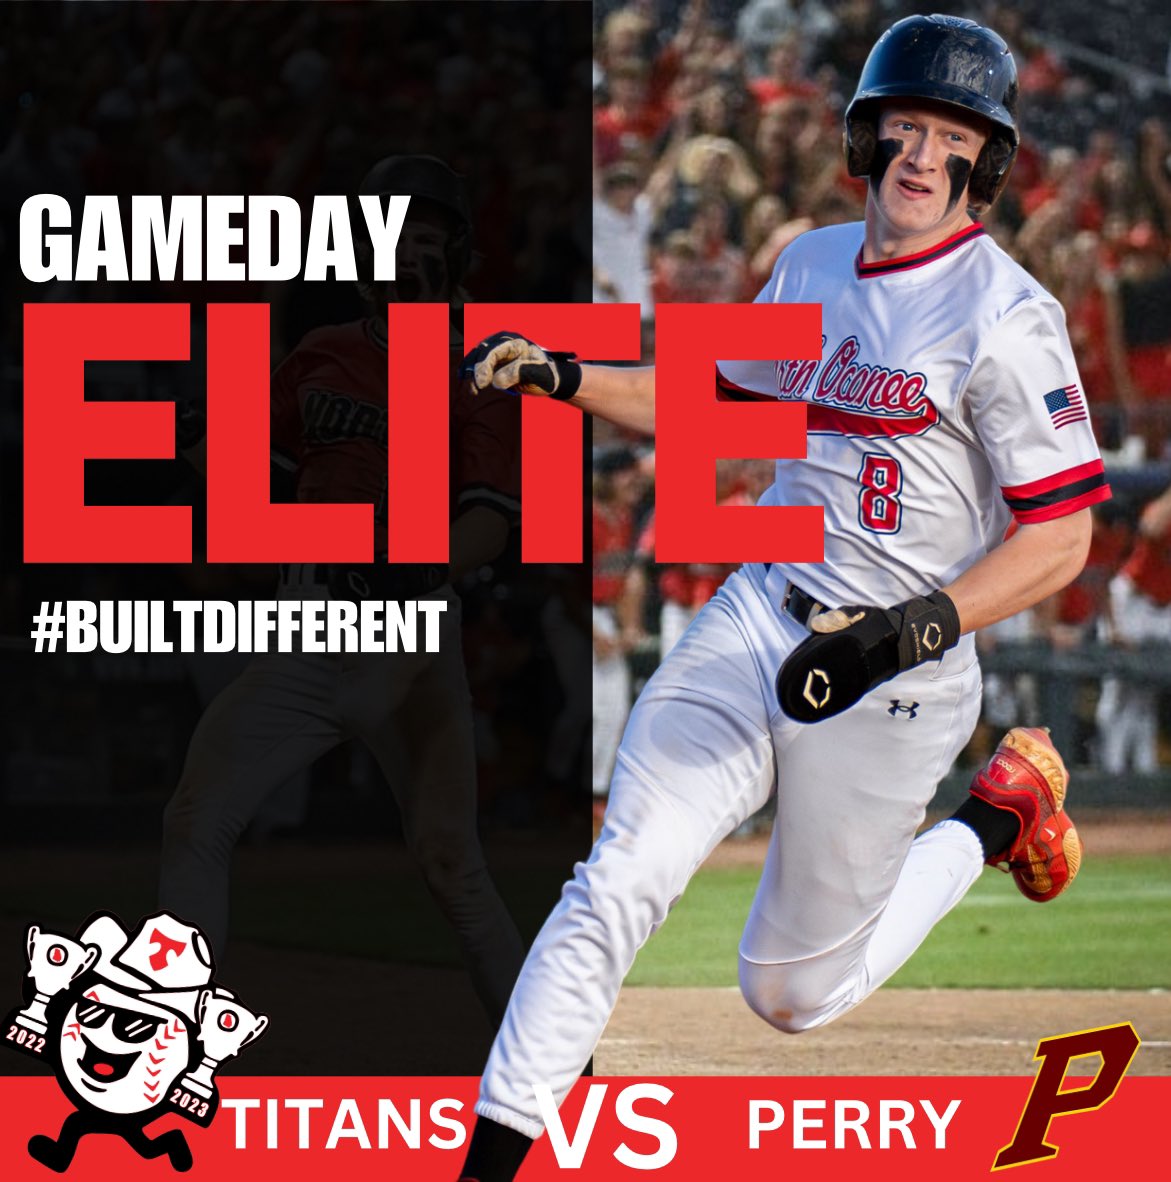 🔥⚾️ GAMEDAY….Titans hit the road for their Elite 8 Matchup🔥⚾️ 🆚 Perry 🏟️ AWAY 📆 May 6th ⏰ 4:00 PM & 7:00 PM 🎟️ GoFan 📸 Connor O’Mara - Sophomore @HomeGameHero #TEAM44 #OurBrand #BuiltDifferent